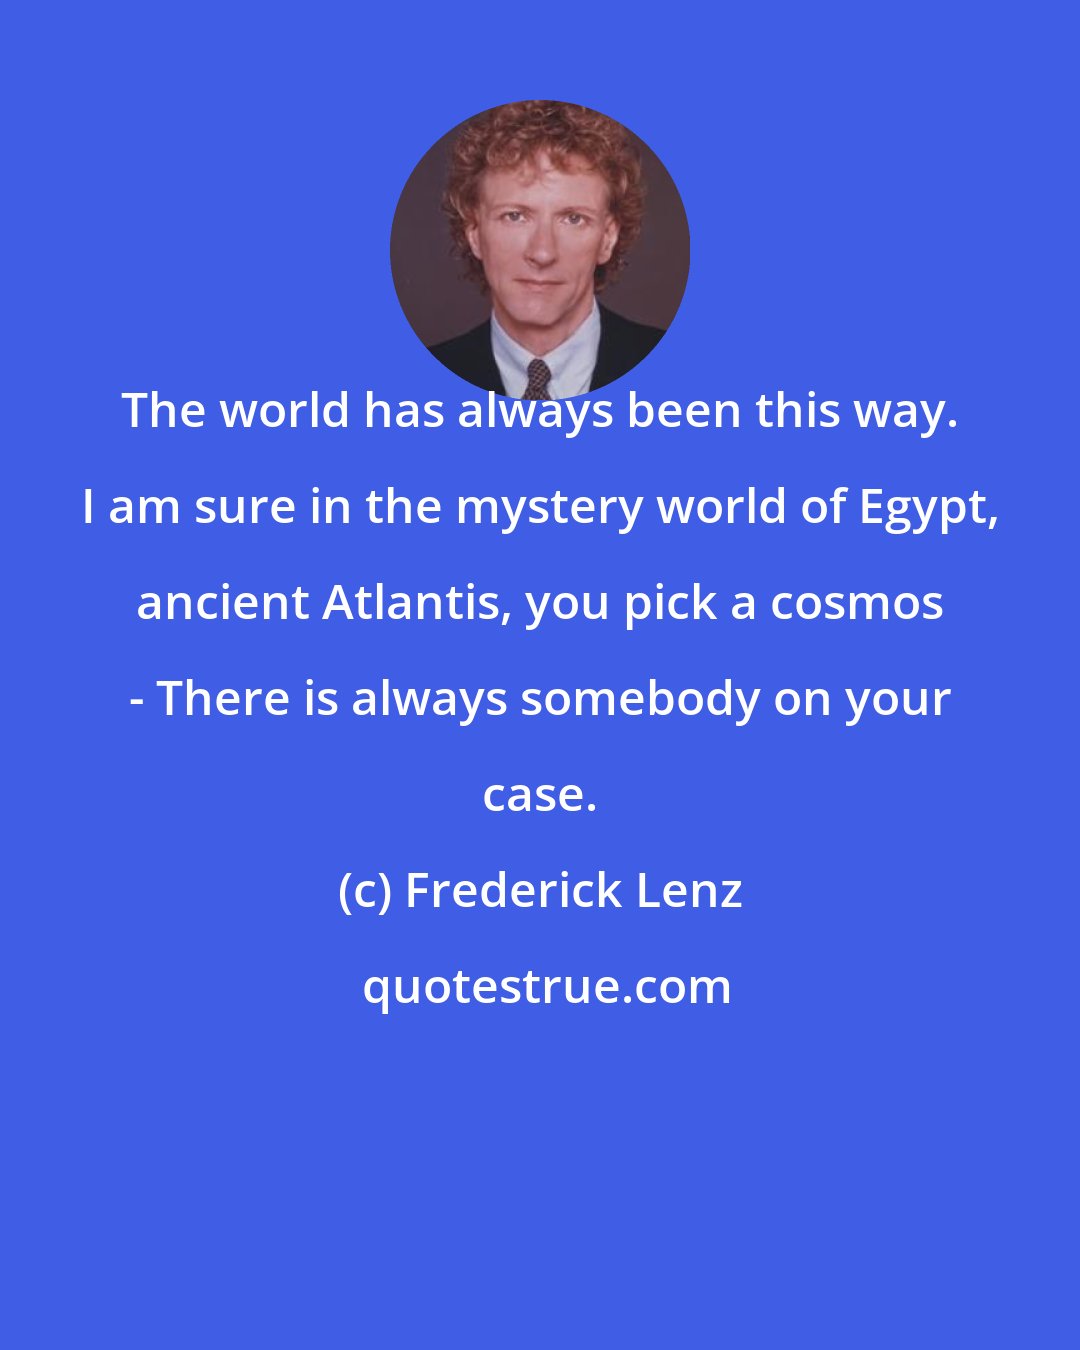 Frederick Lenz: The world has always been this way. I am sure in the mystery world of Egypt, ancient Atlantis, you pick a cosmos - There is always somebody on your case.